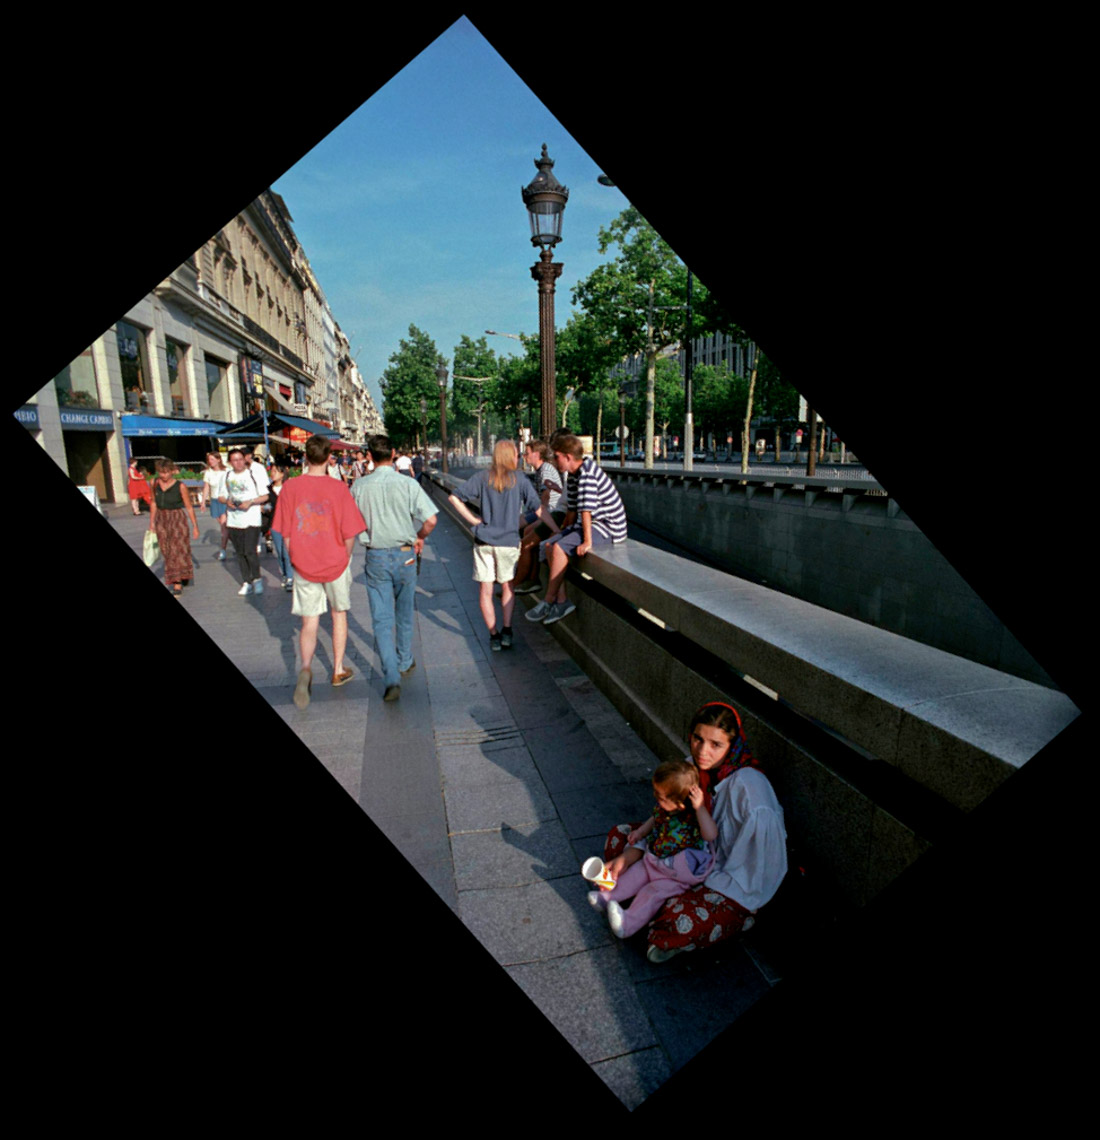 "Gypsy with Child", Champs-Elysees, Paris France 1997, Contemporary Art Photography,  Color Film Photography